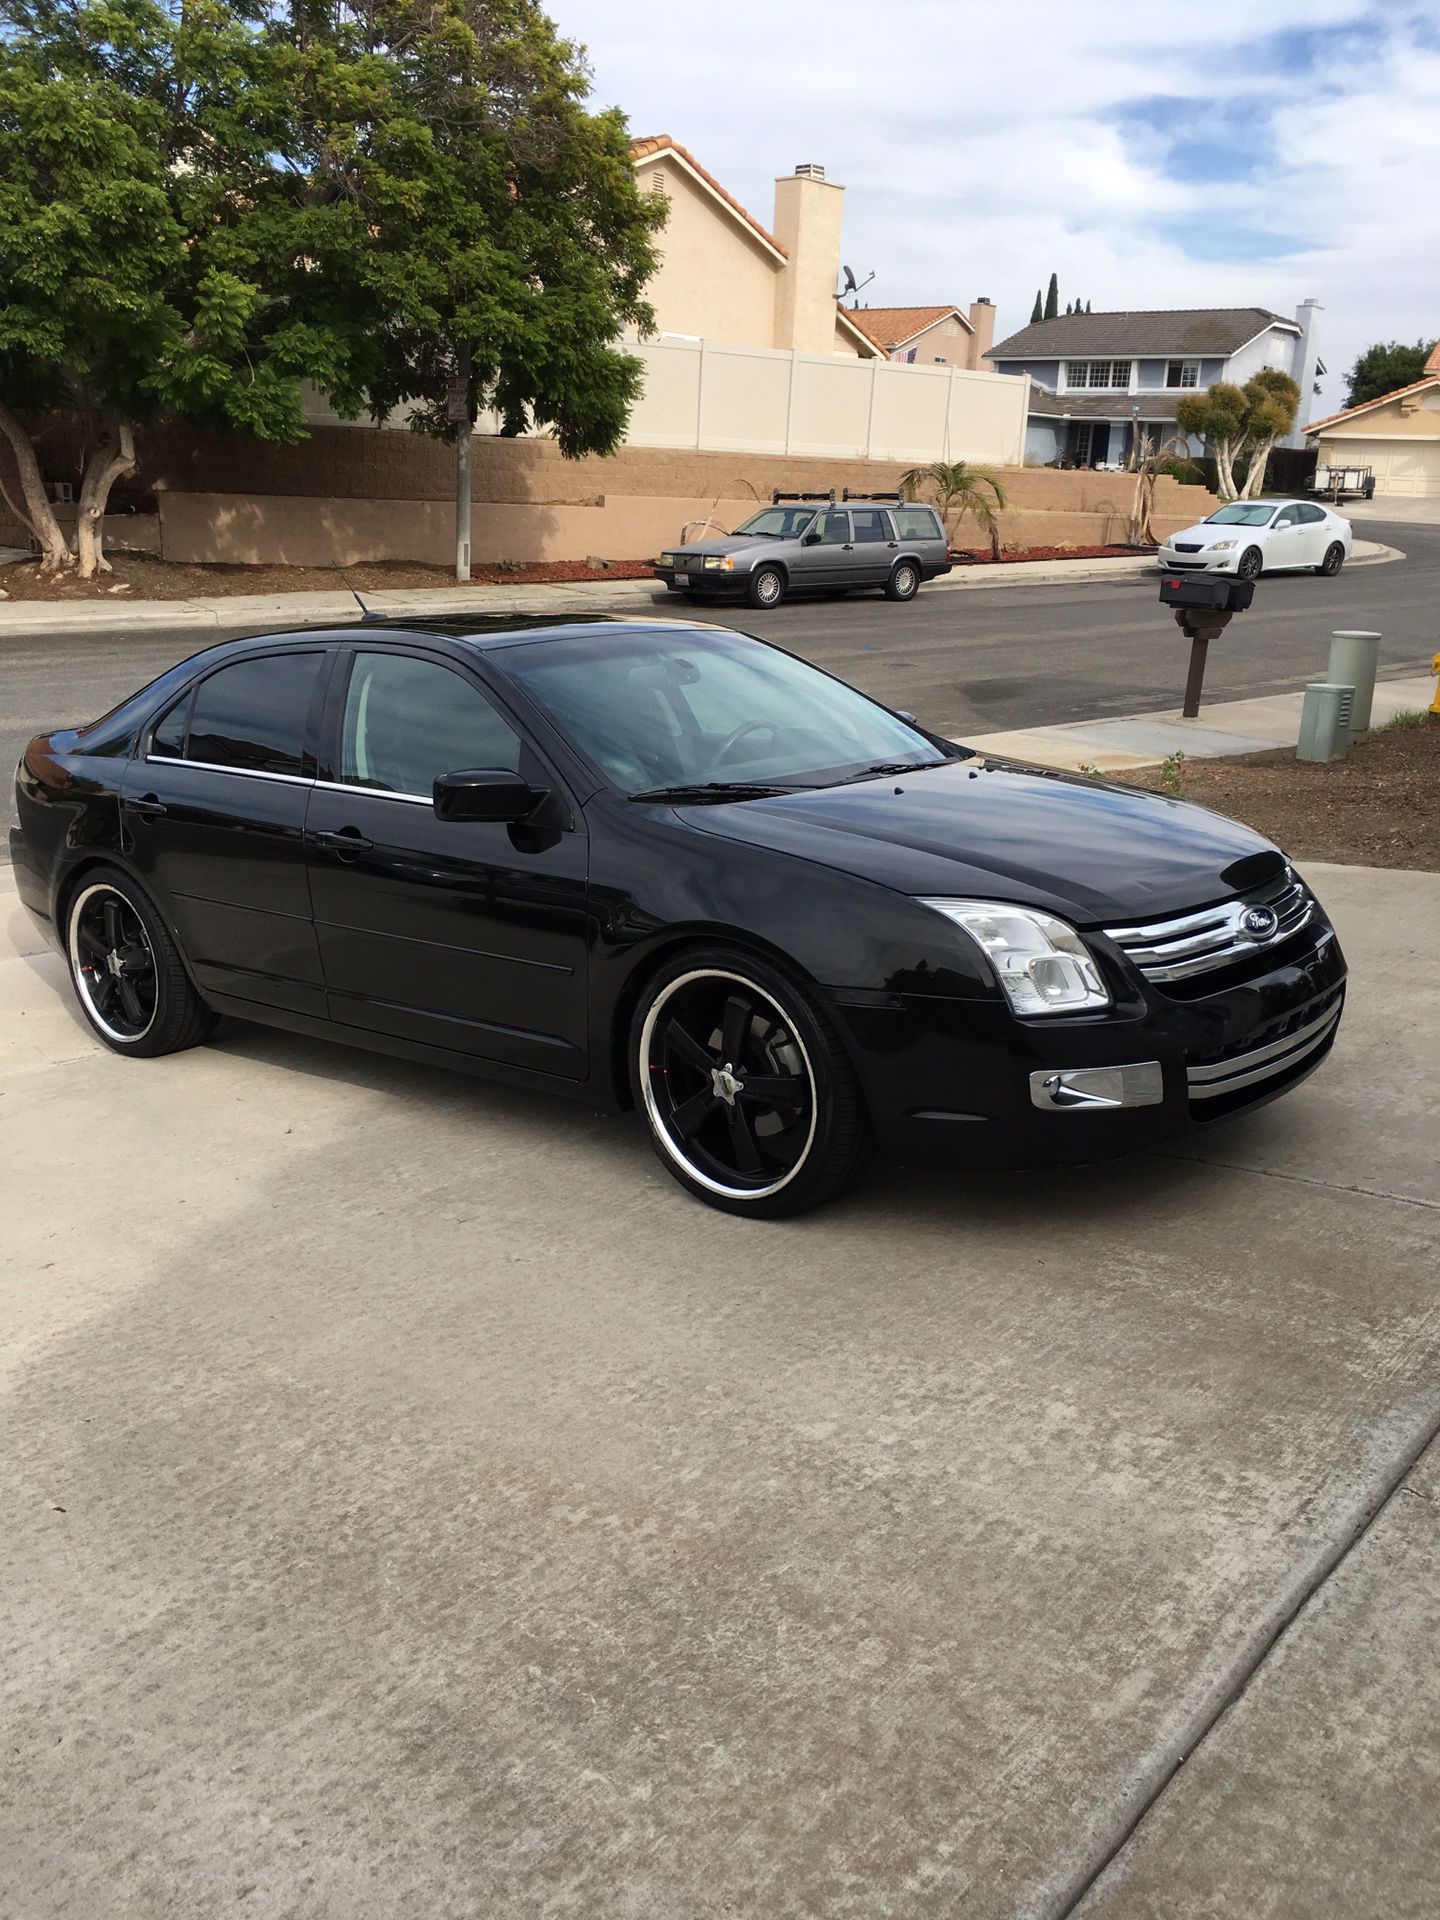 2009 Ford Fusion for Sale in Oceanside, CA - OfferUp